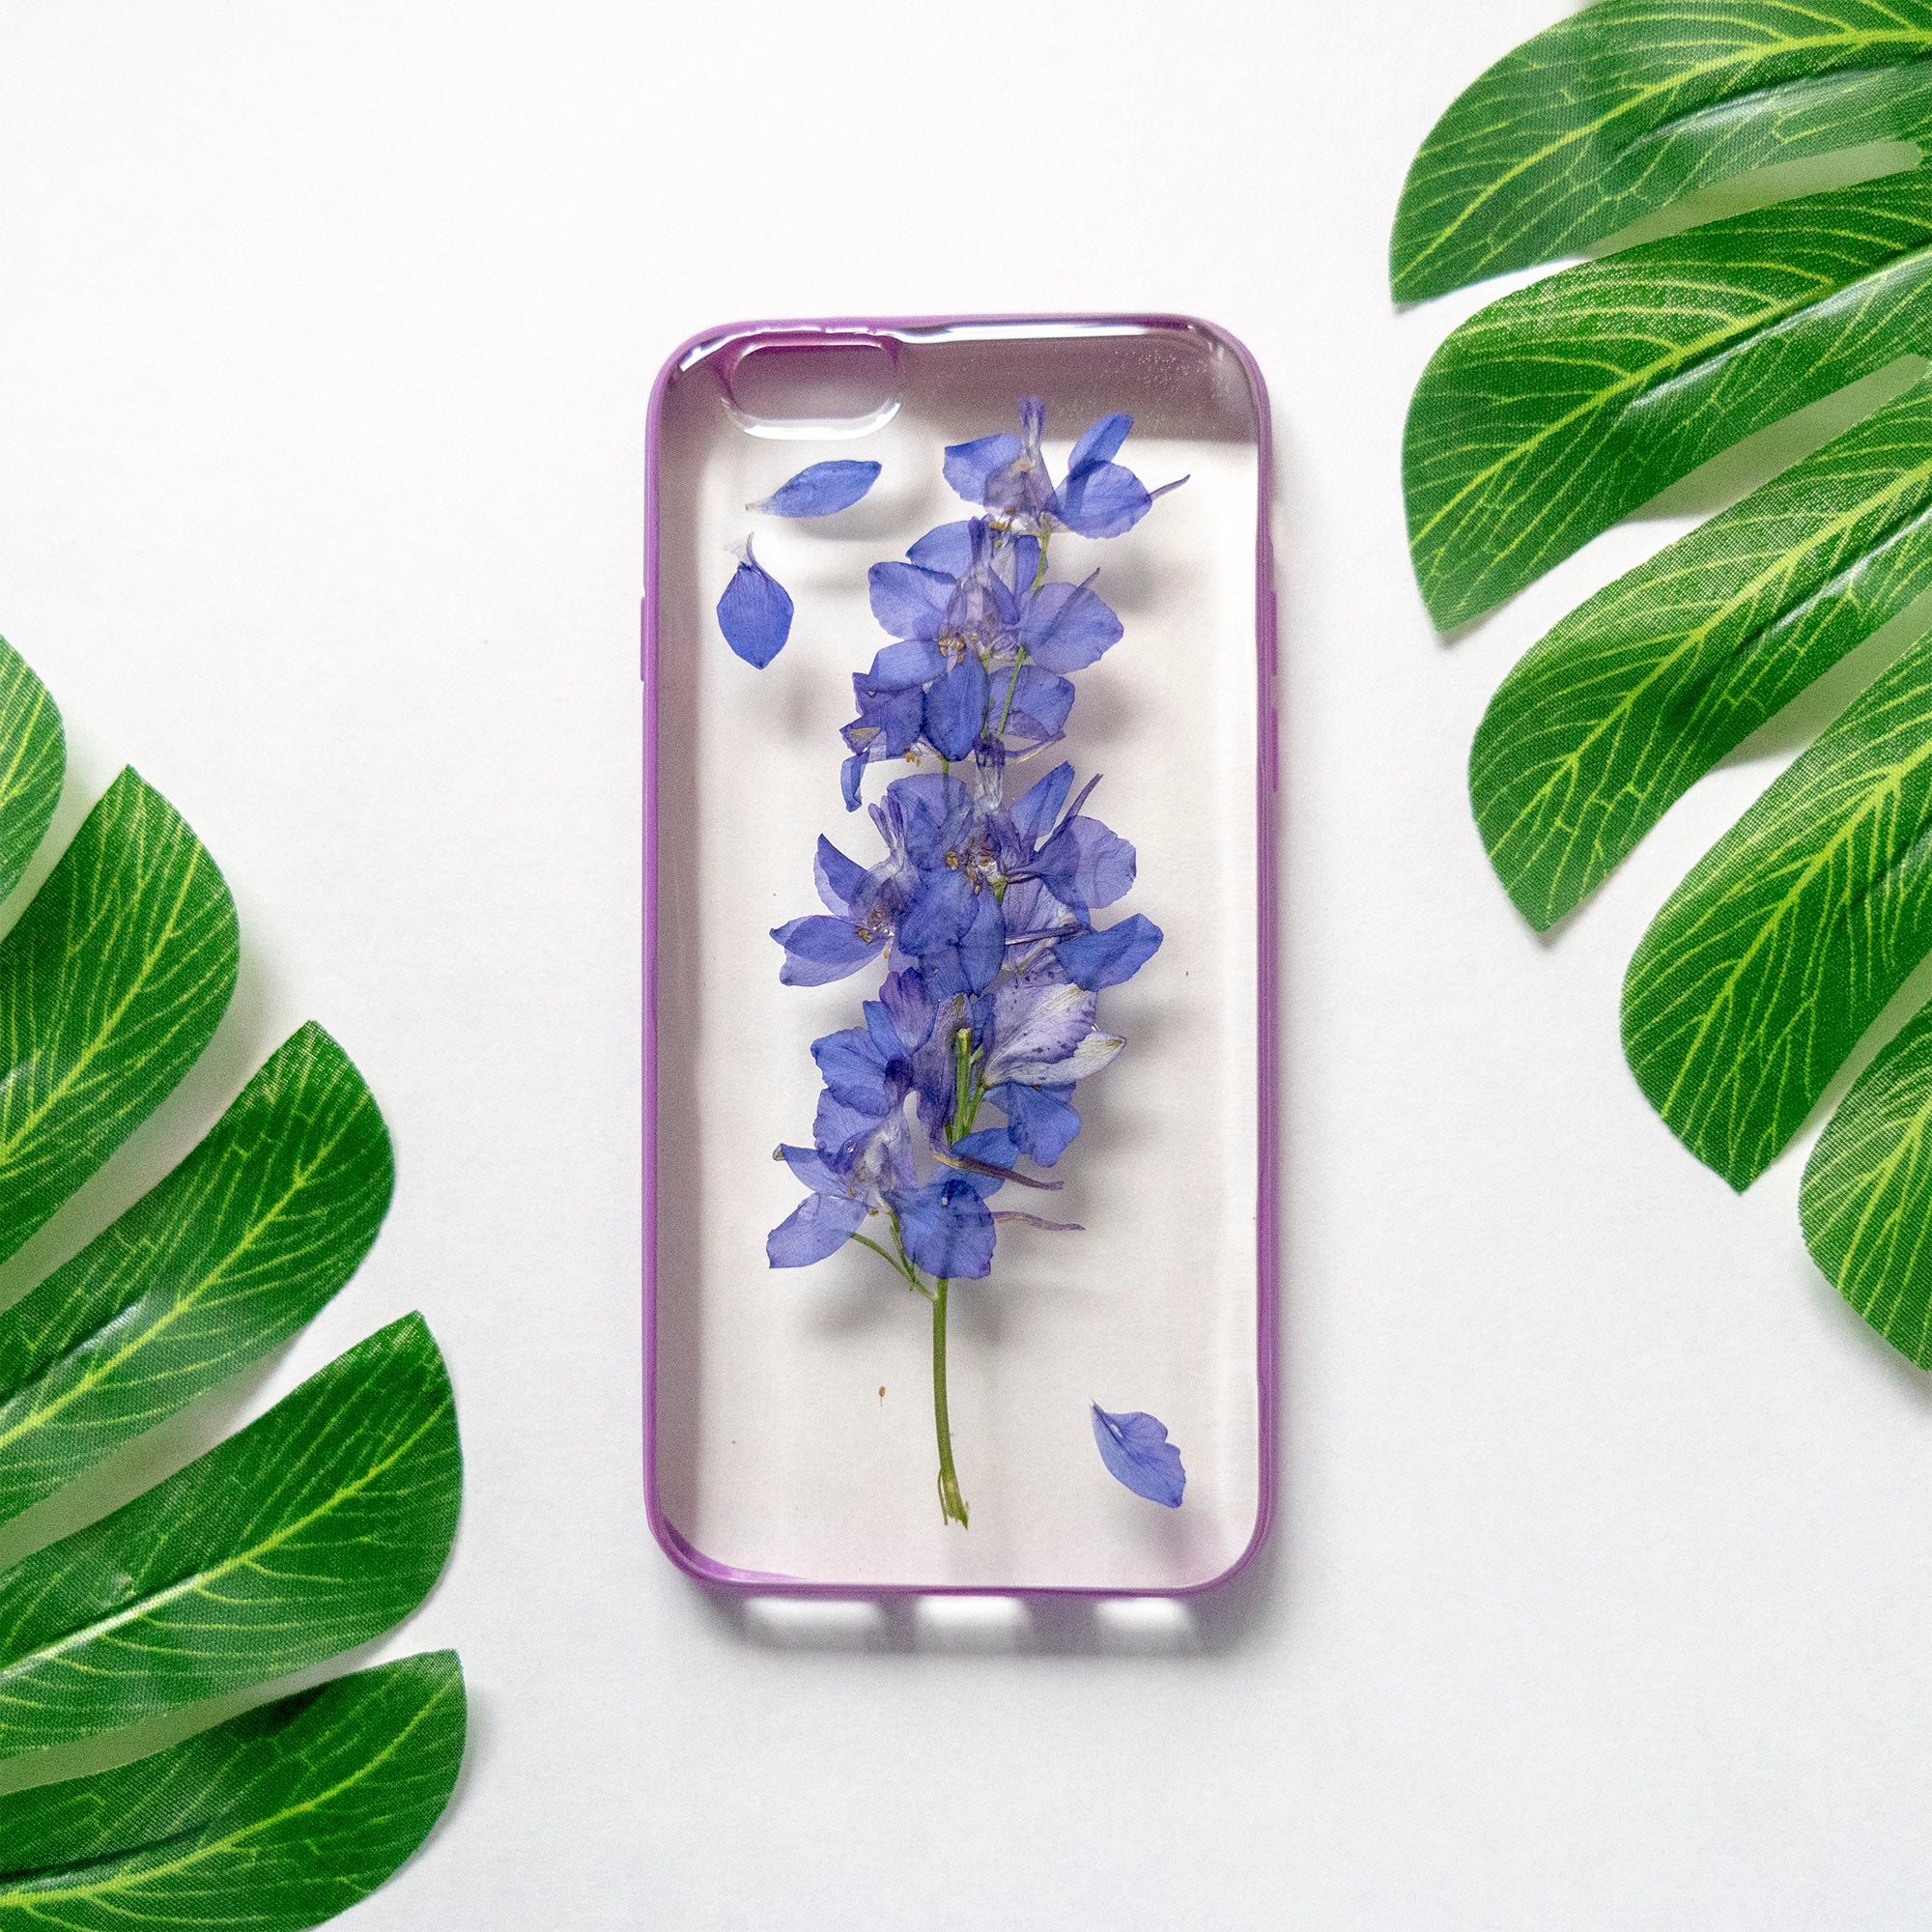 Real Pressed Purple Flower Floral iPhone 6 6s Protective Bumper Case Floral Neverland Floralfy 01